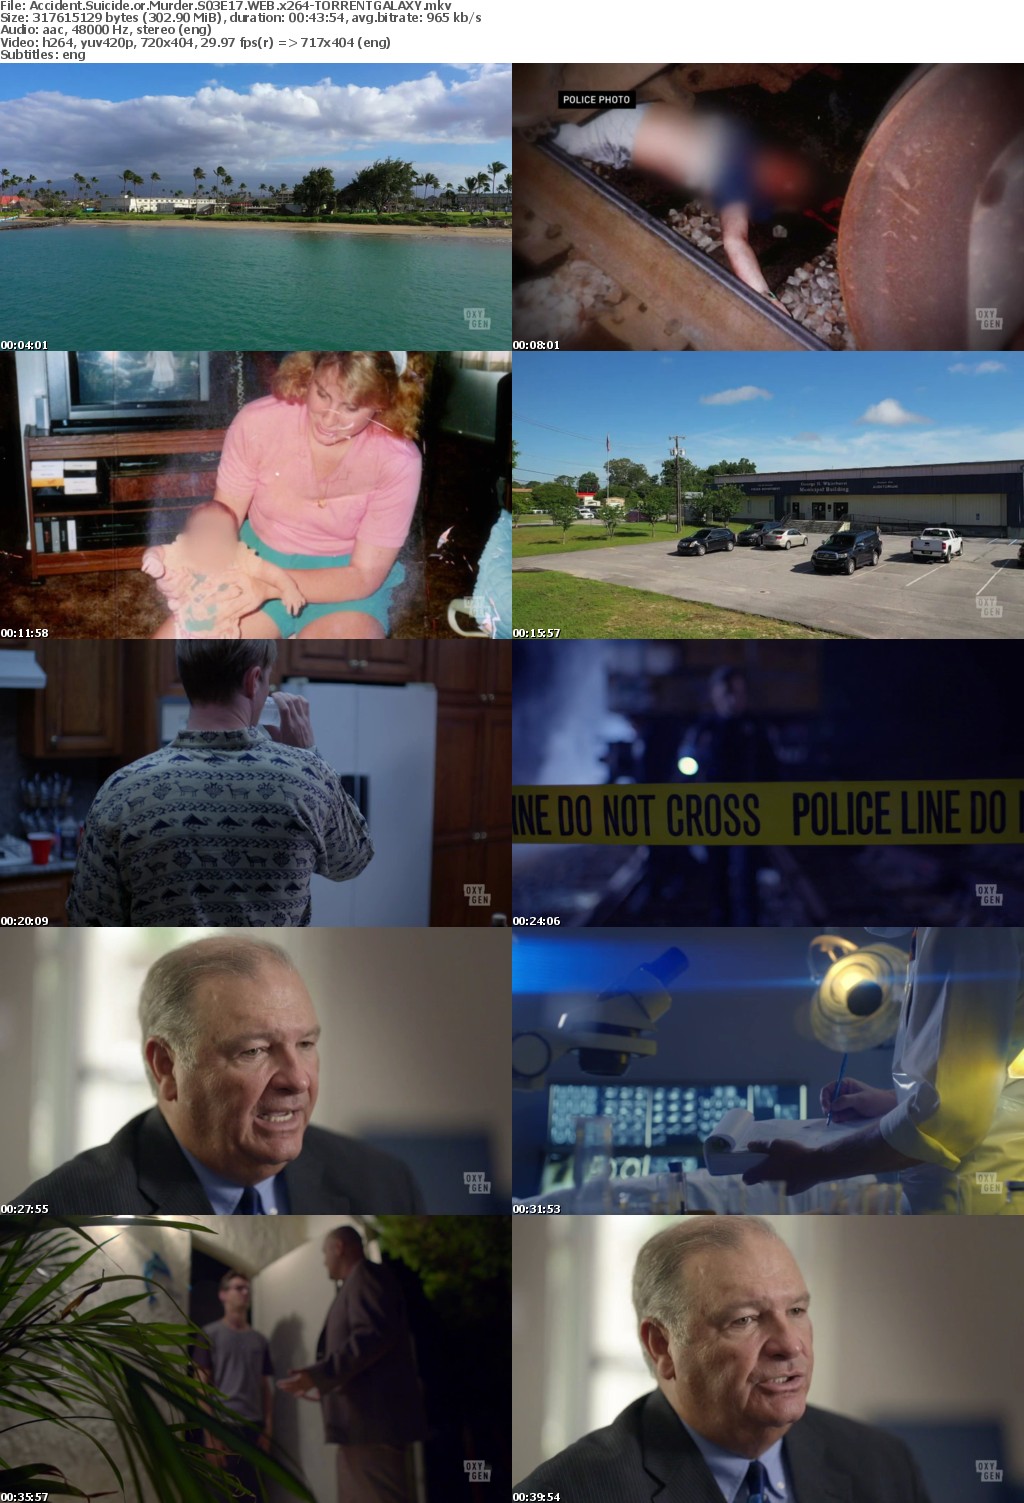 Accident Suicide or Murder S03E17 WEB x264-GALAXY